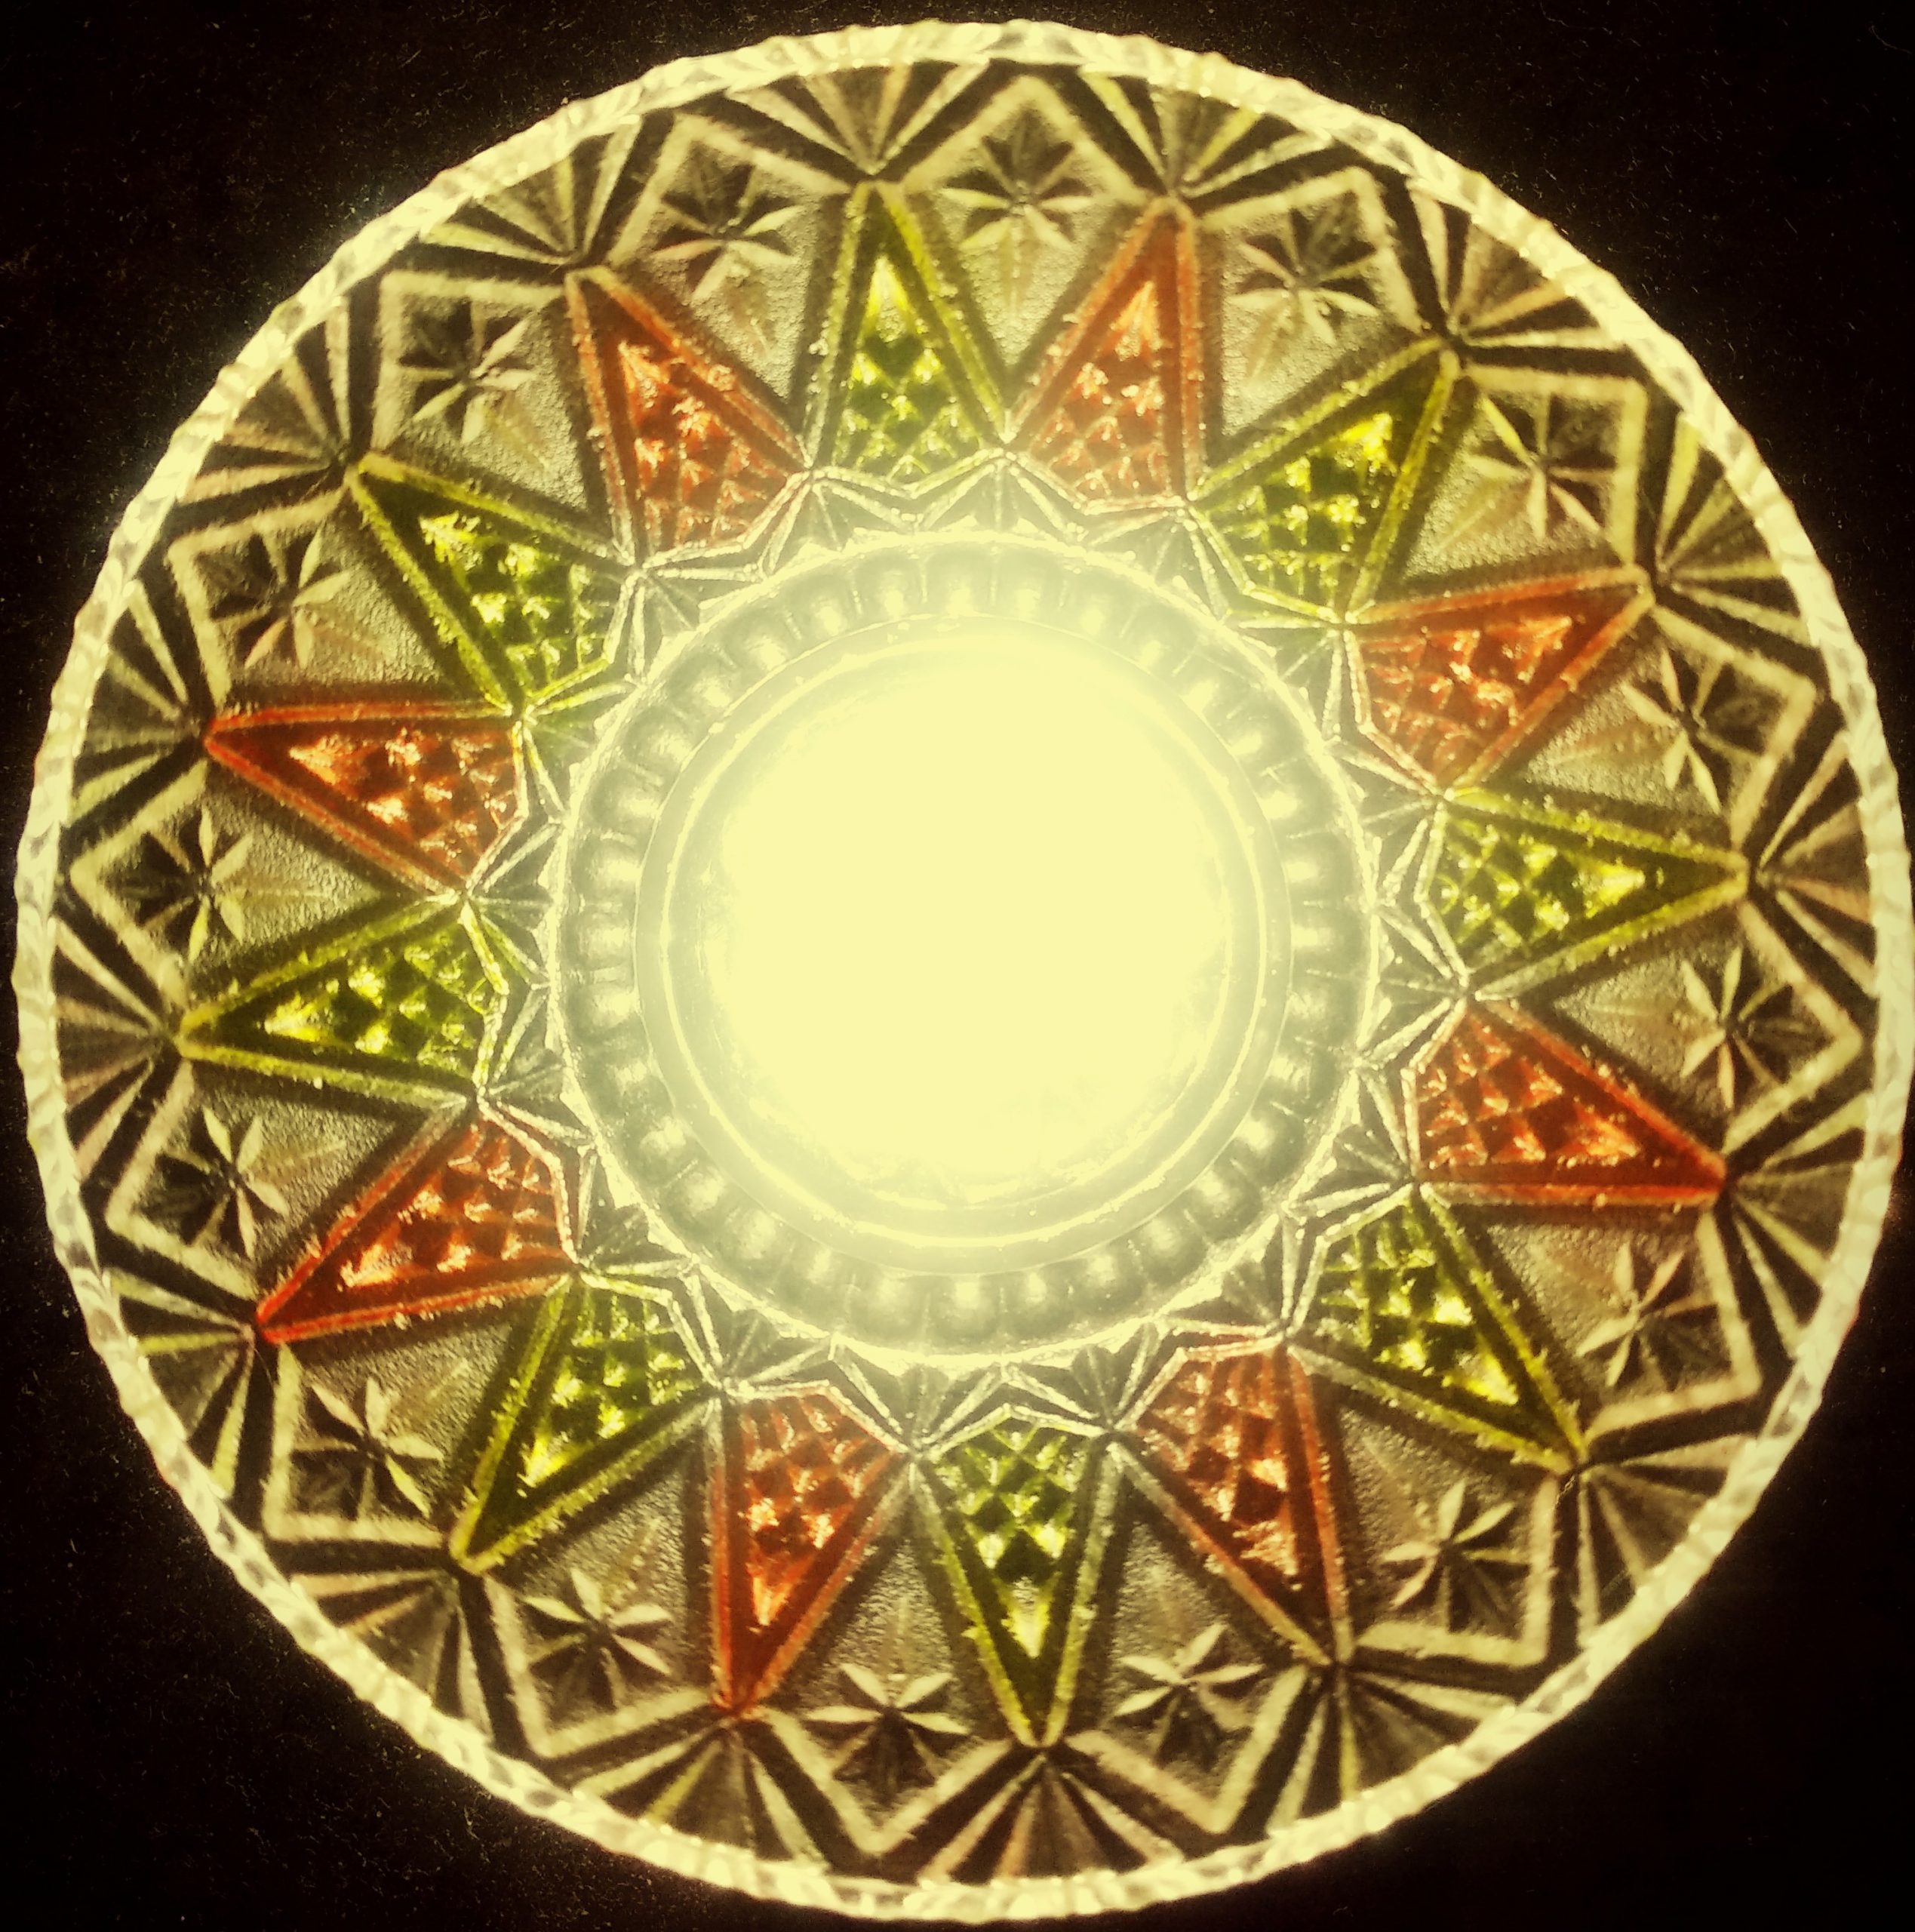 A design on glass bowl